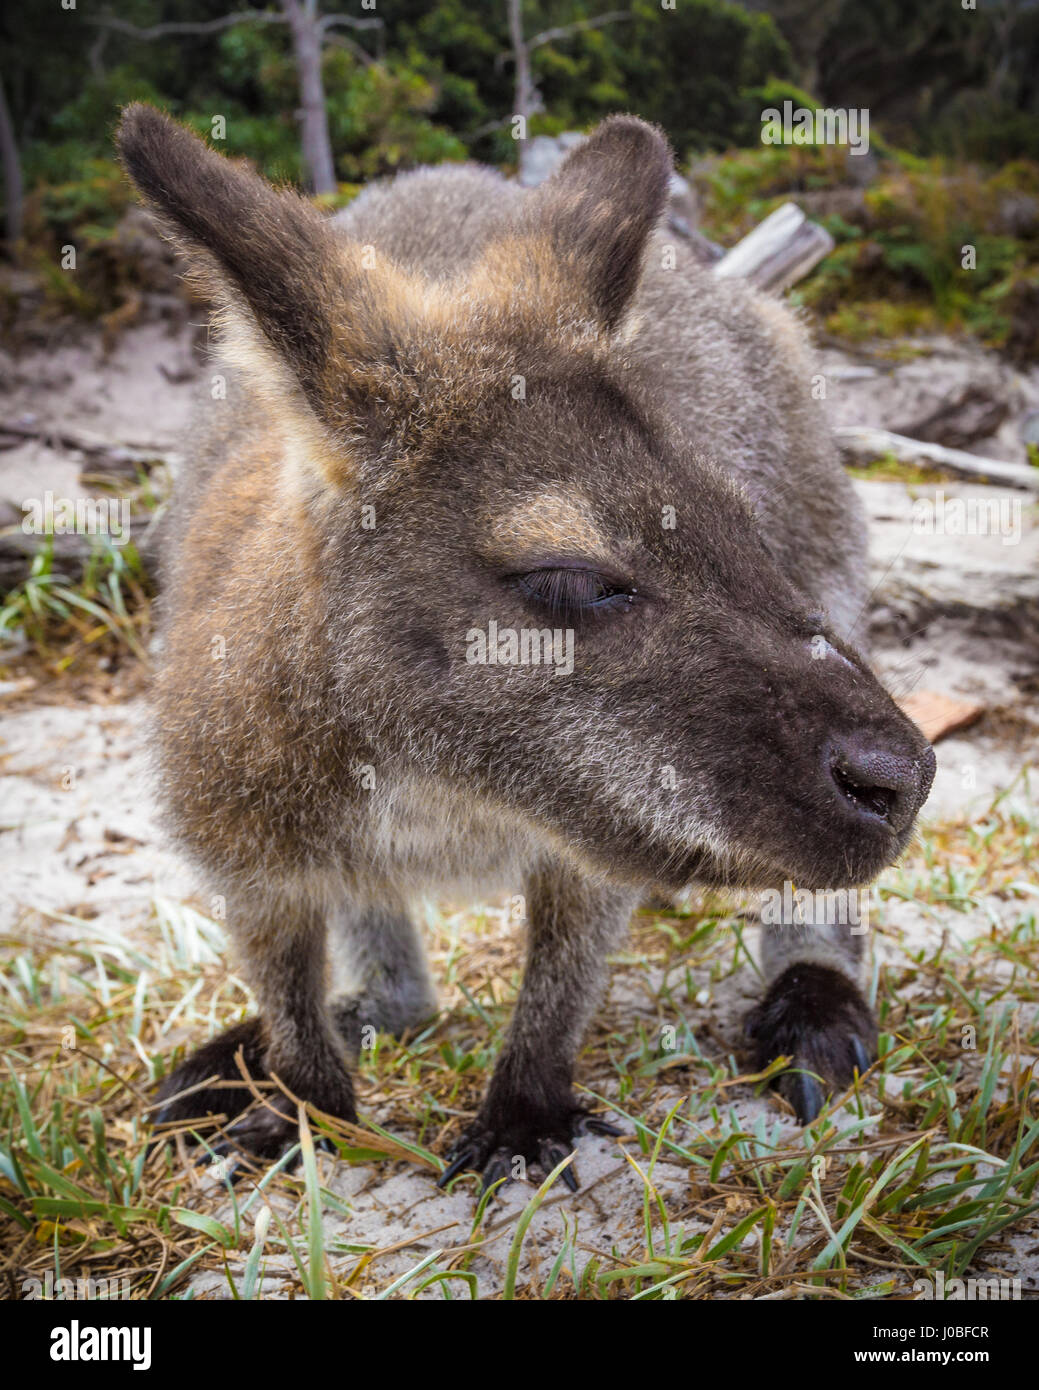 The red-necked wallaby or Bennett's wallaby (Macropus rufogriseus) sitting on a beach close-up Stock Photo